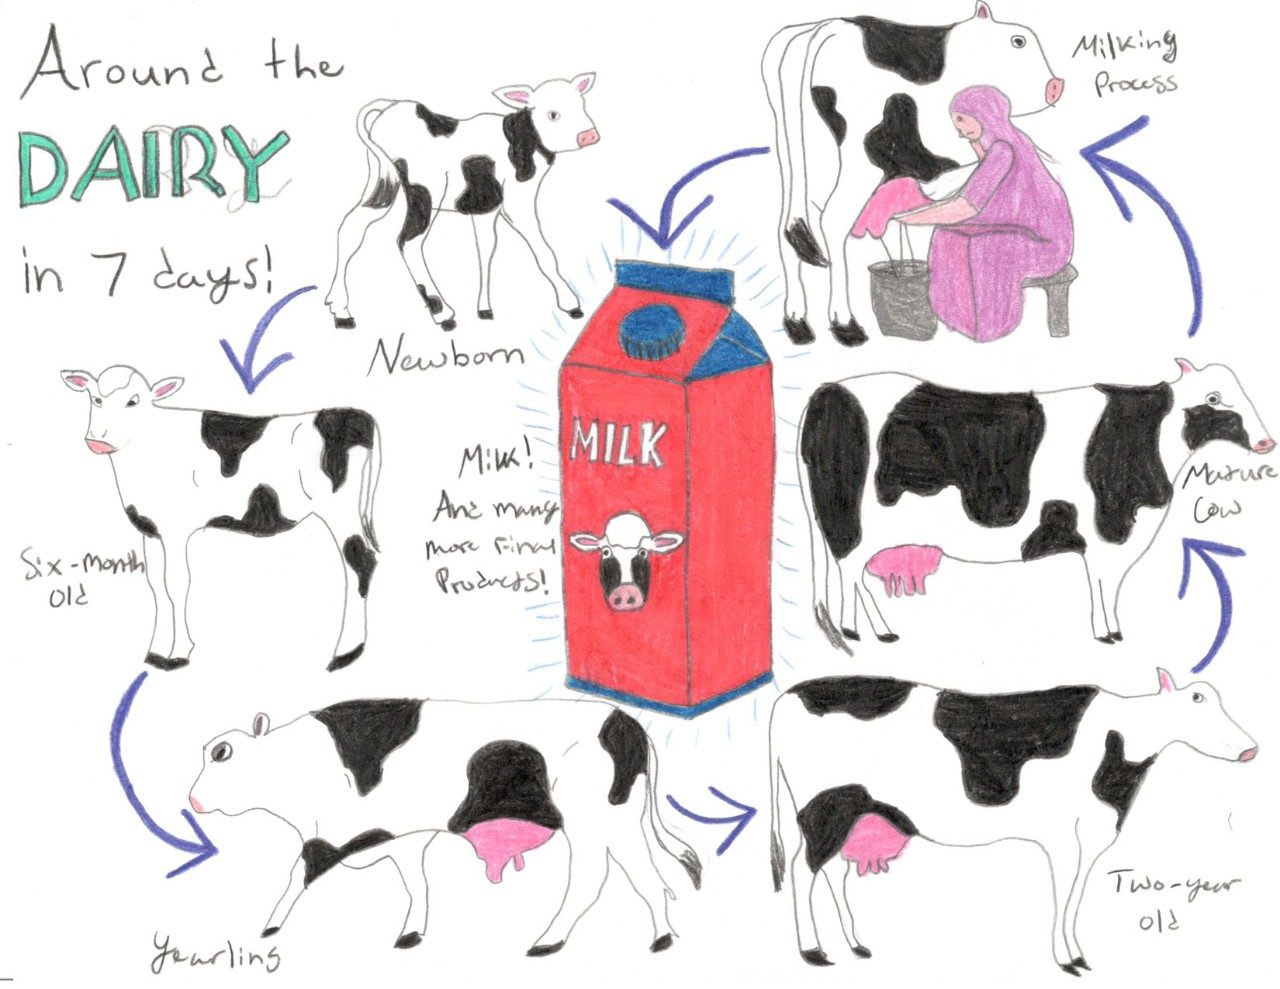 2023 June Dairy Month Poster Contest. Around the Dairy in 7 Days. Ariel Matthews, Shenandoah County, Senior Division. First Place.